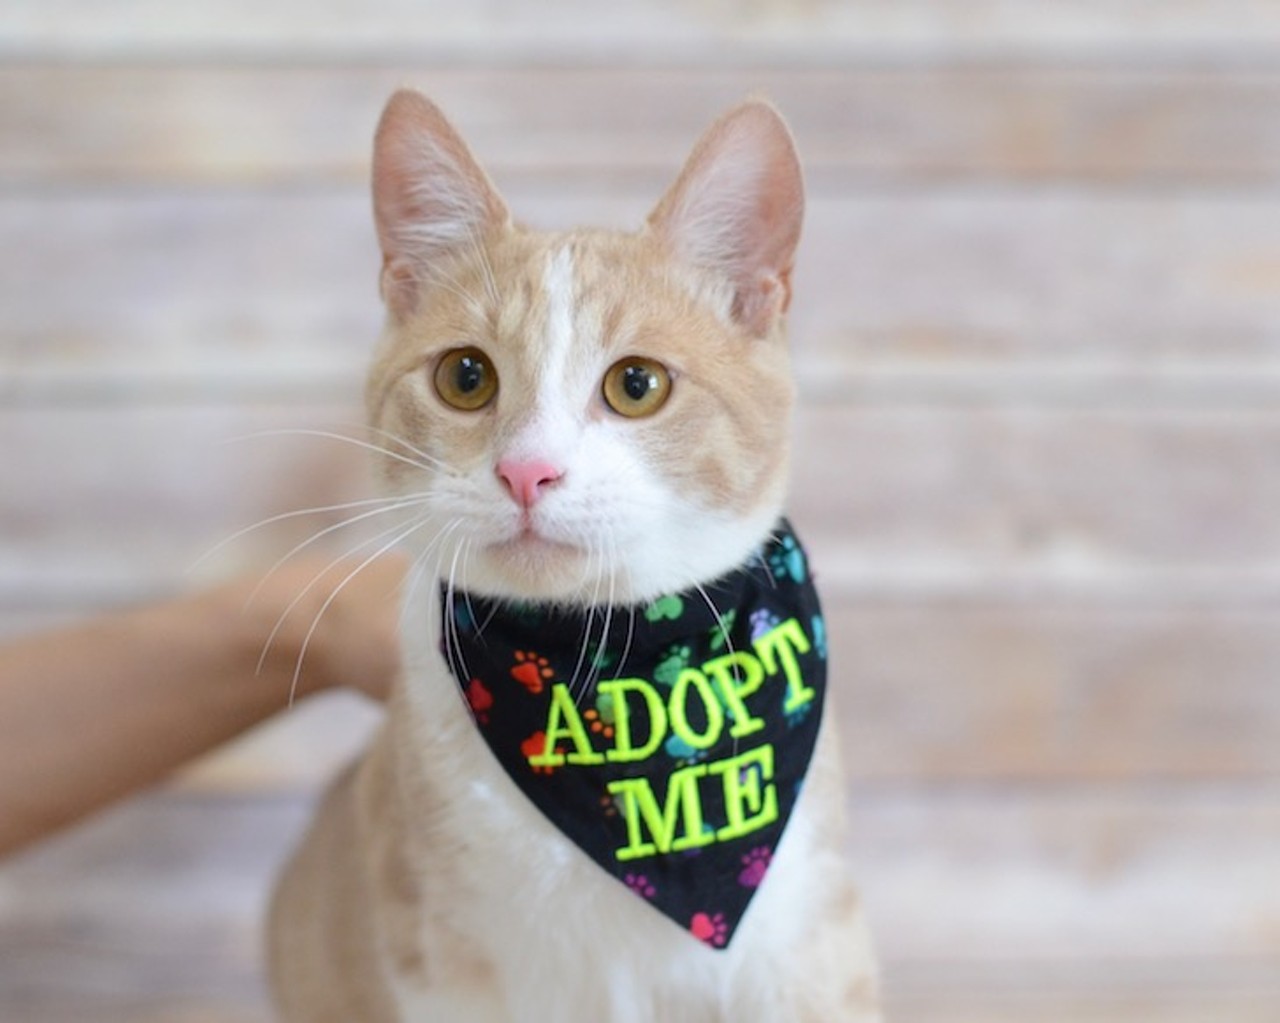 11 adoptable kitties looking for a new home in the Orlando area